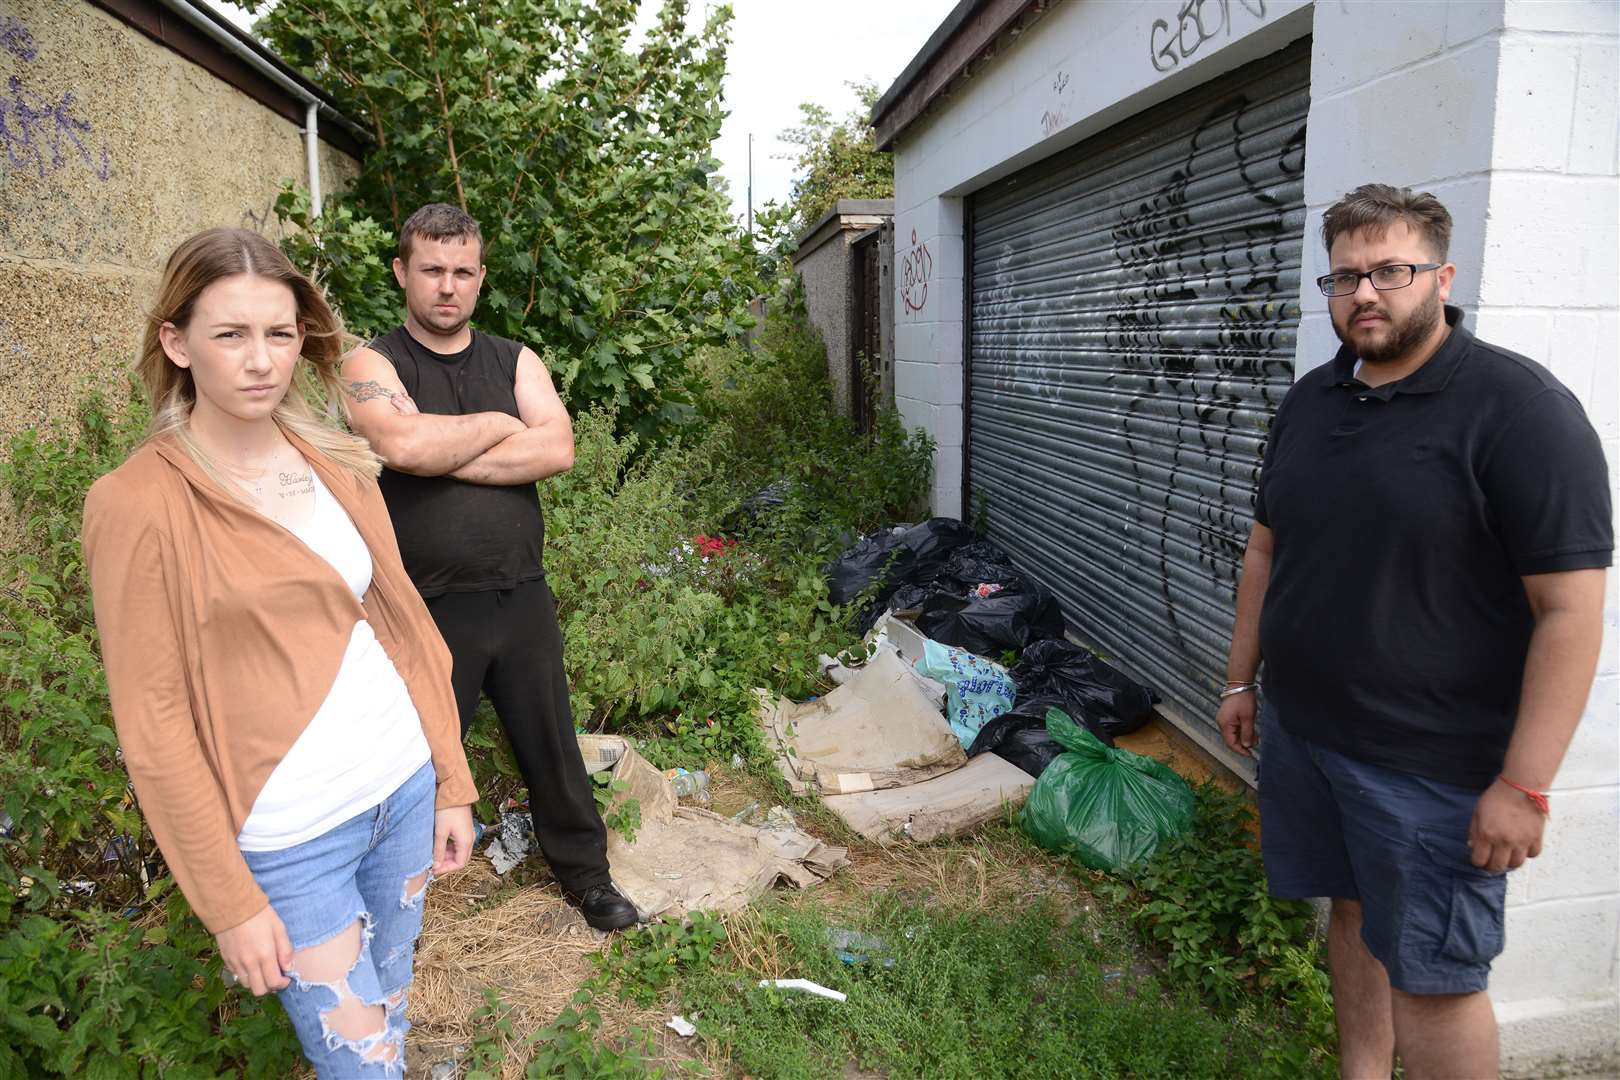 Residents have had enough of the rubbish being tipped behind their homes